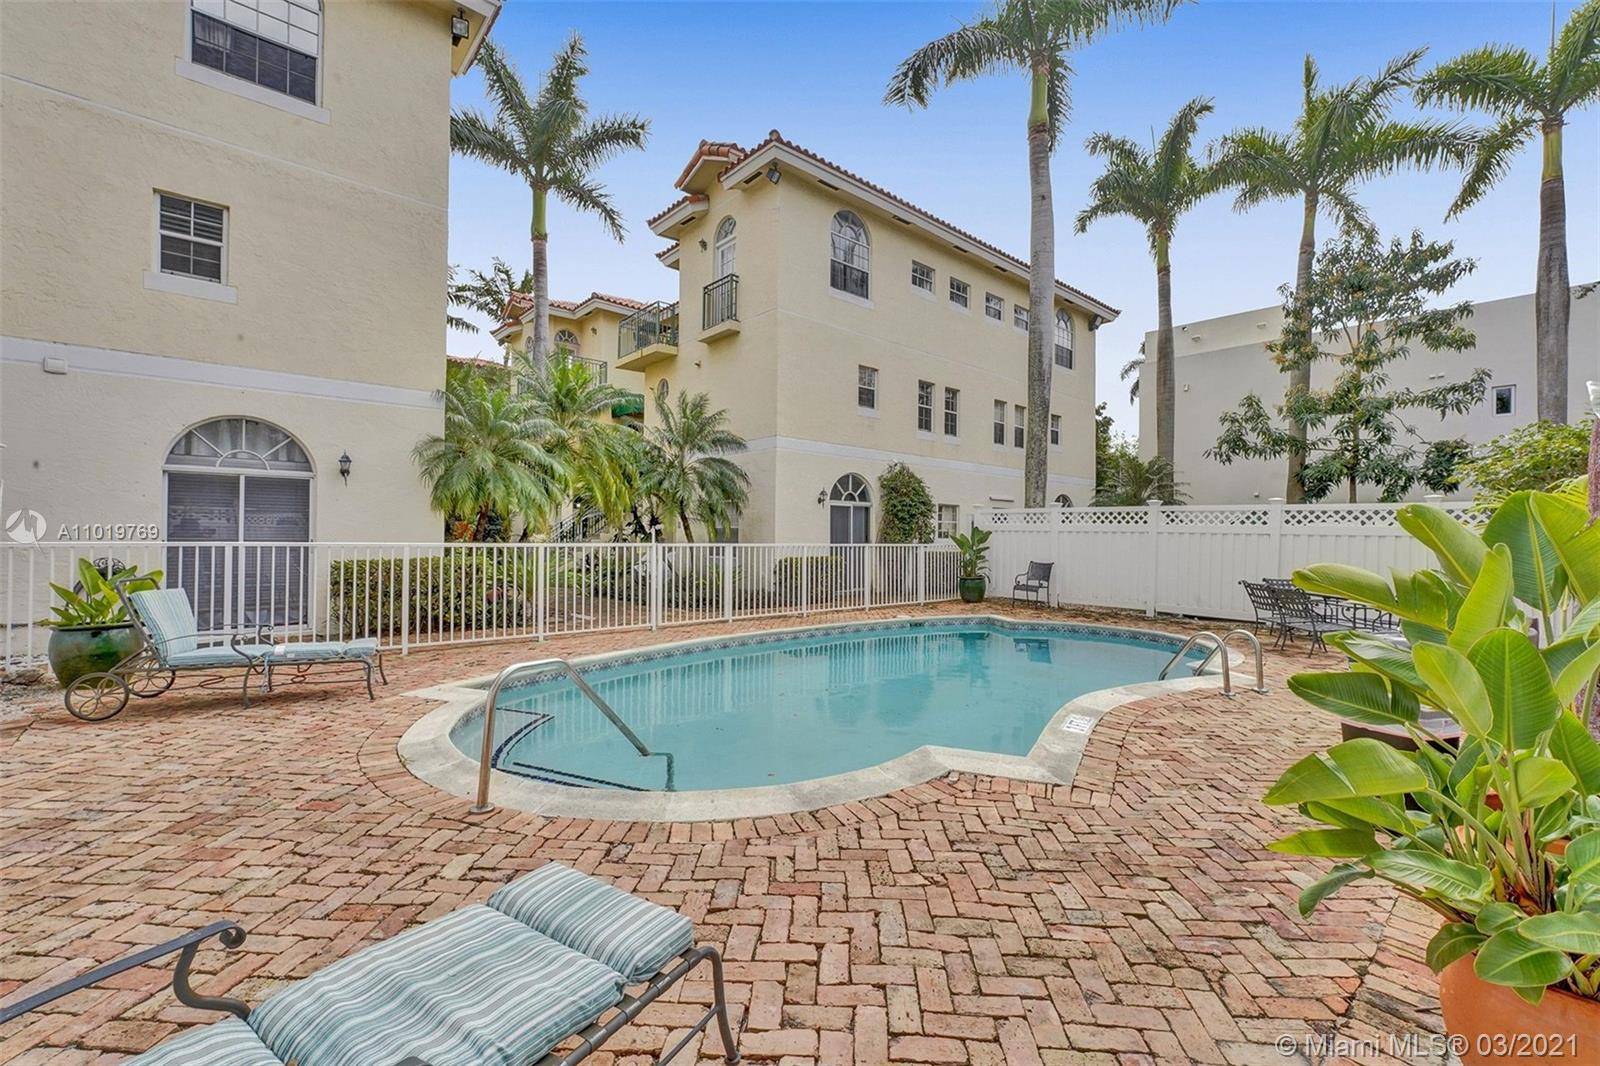 Enjoy this beautiful condo townhouse style located in Coconut Grove.